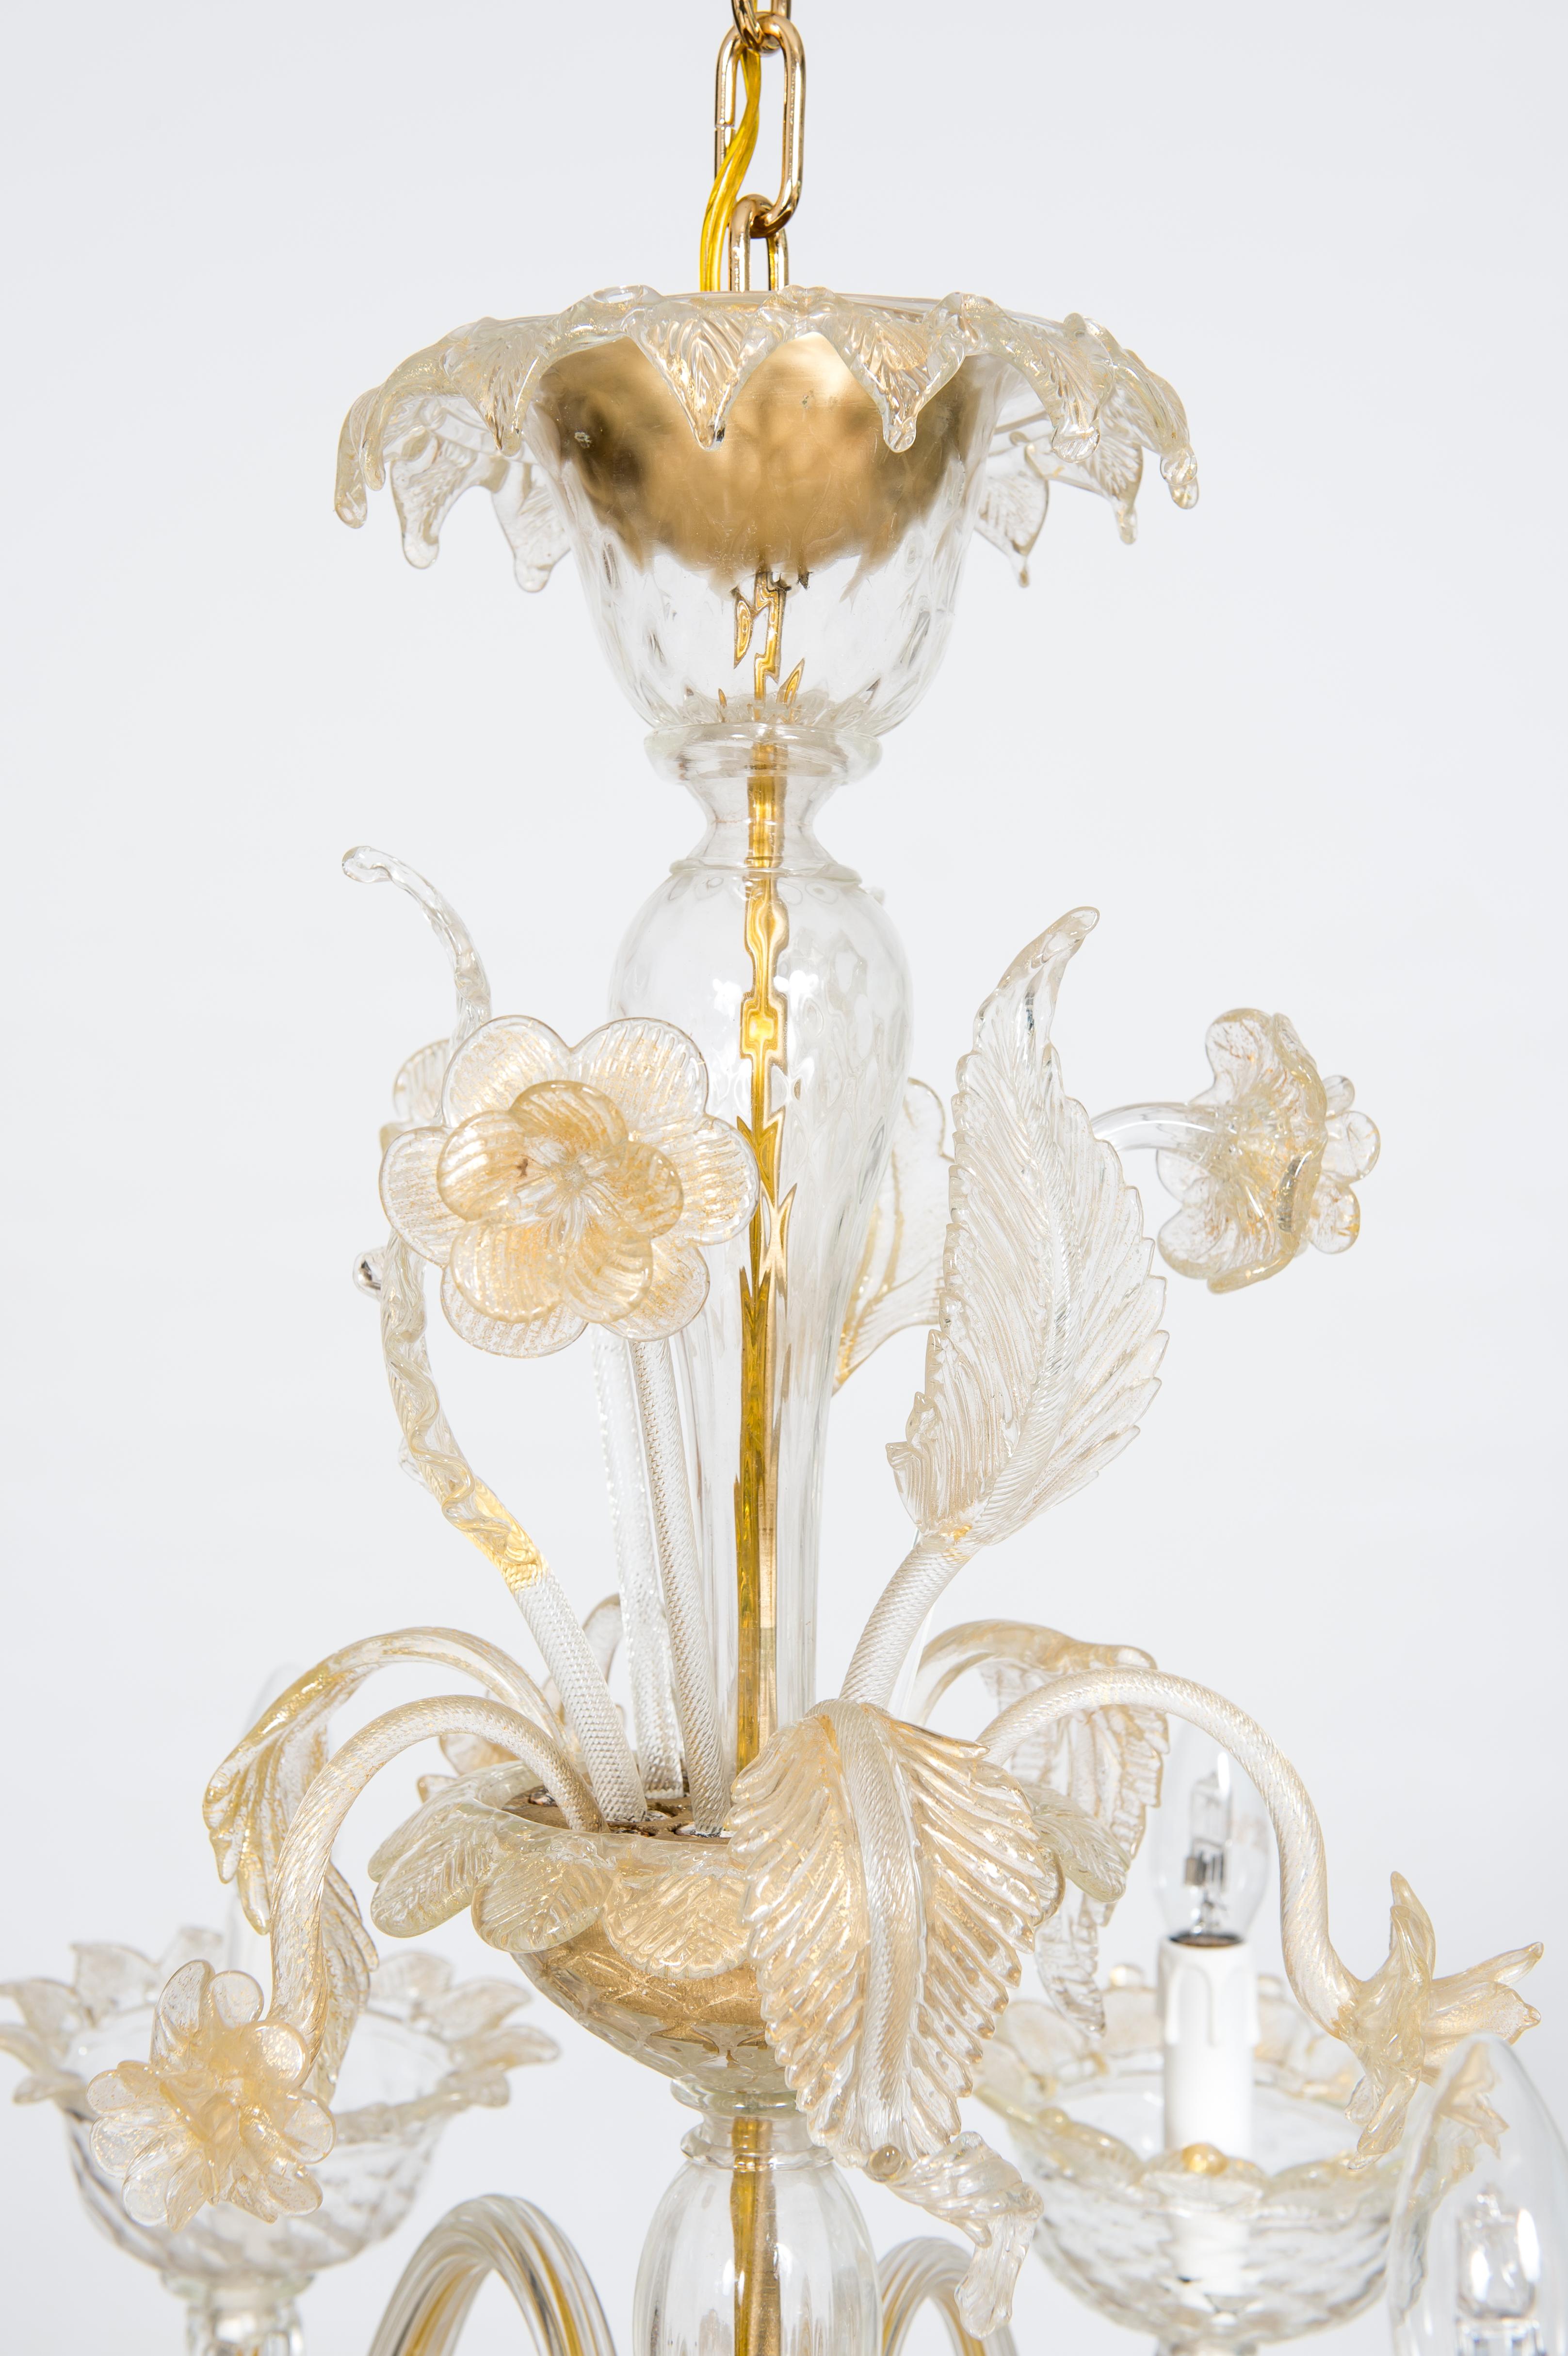 Golden Murano Glass Chandelier with “Vere” Decorations, 20th Century, Italy For Sale 8